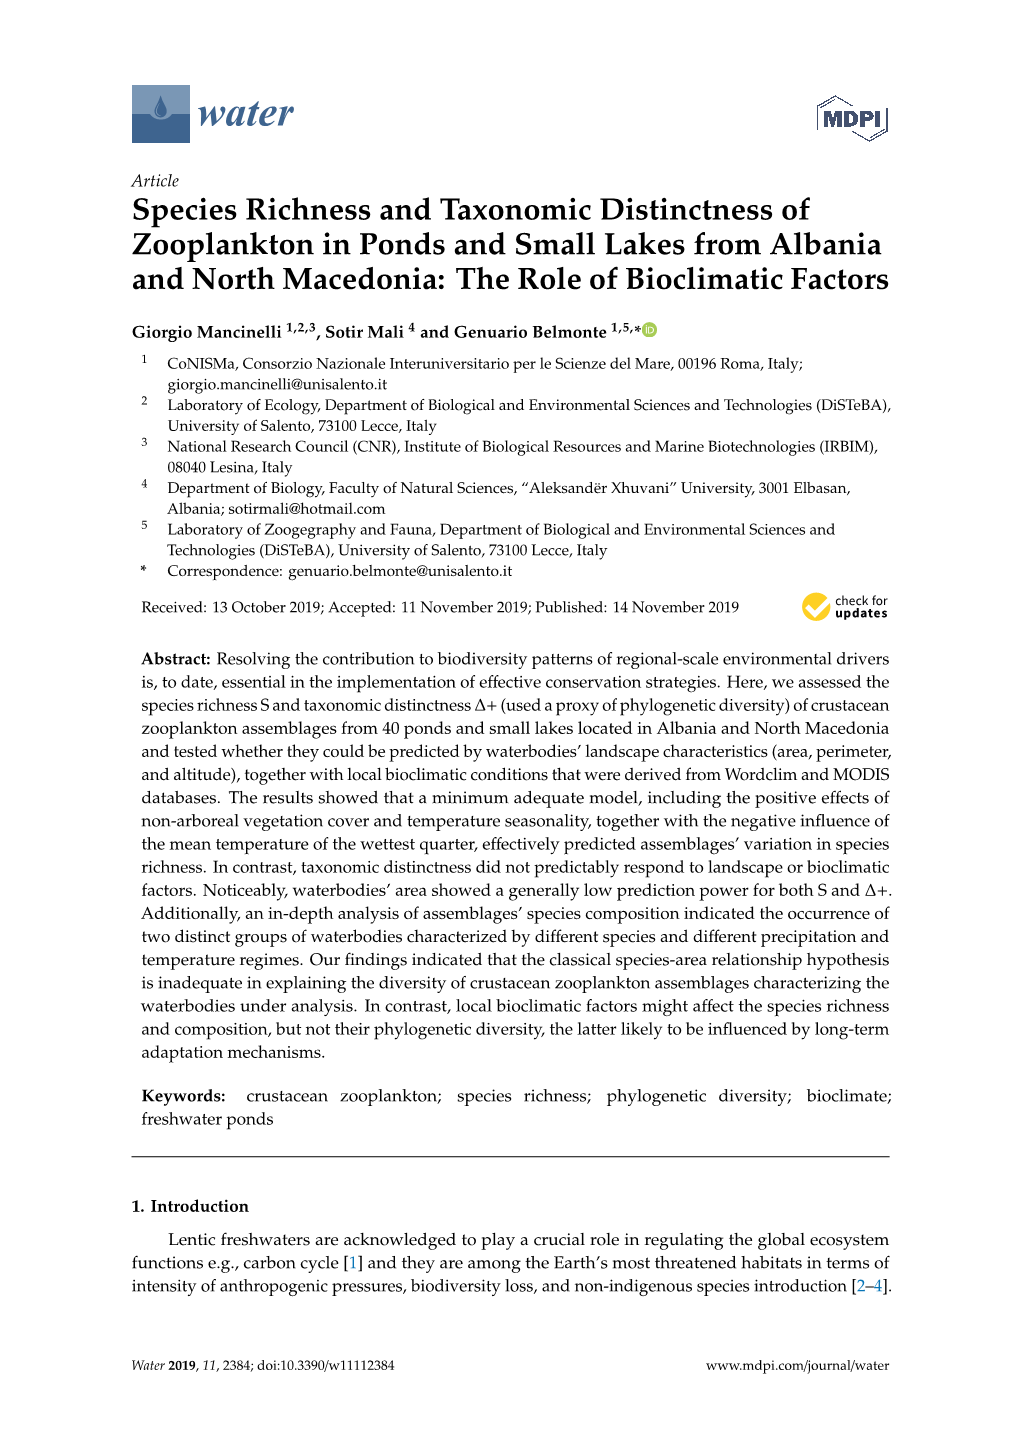 Species Richness and Taxonomic Distinctness of Zooplankton in Ponds and Small Lakes from Albania and North Macedonia: the Role of Bioclimatic Factors